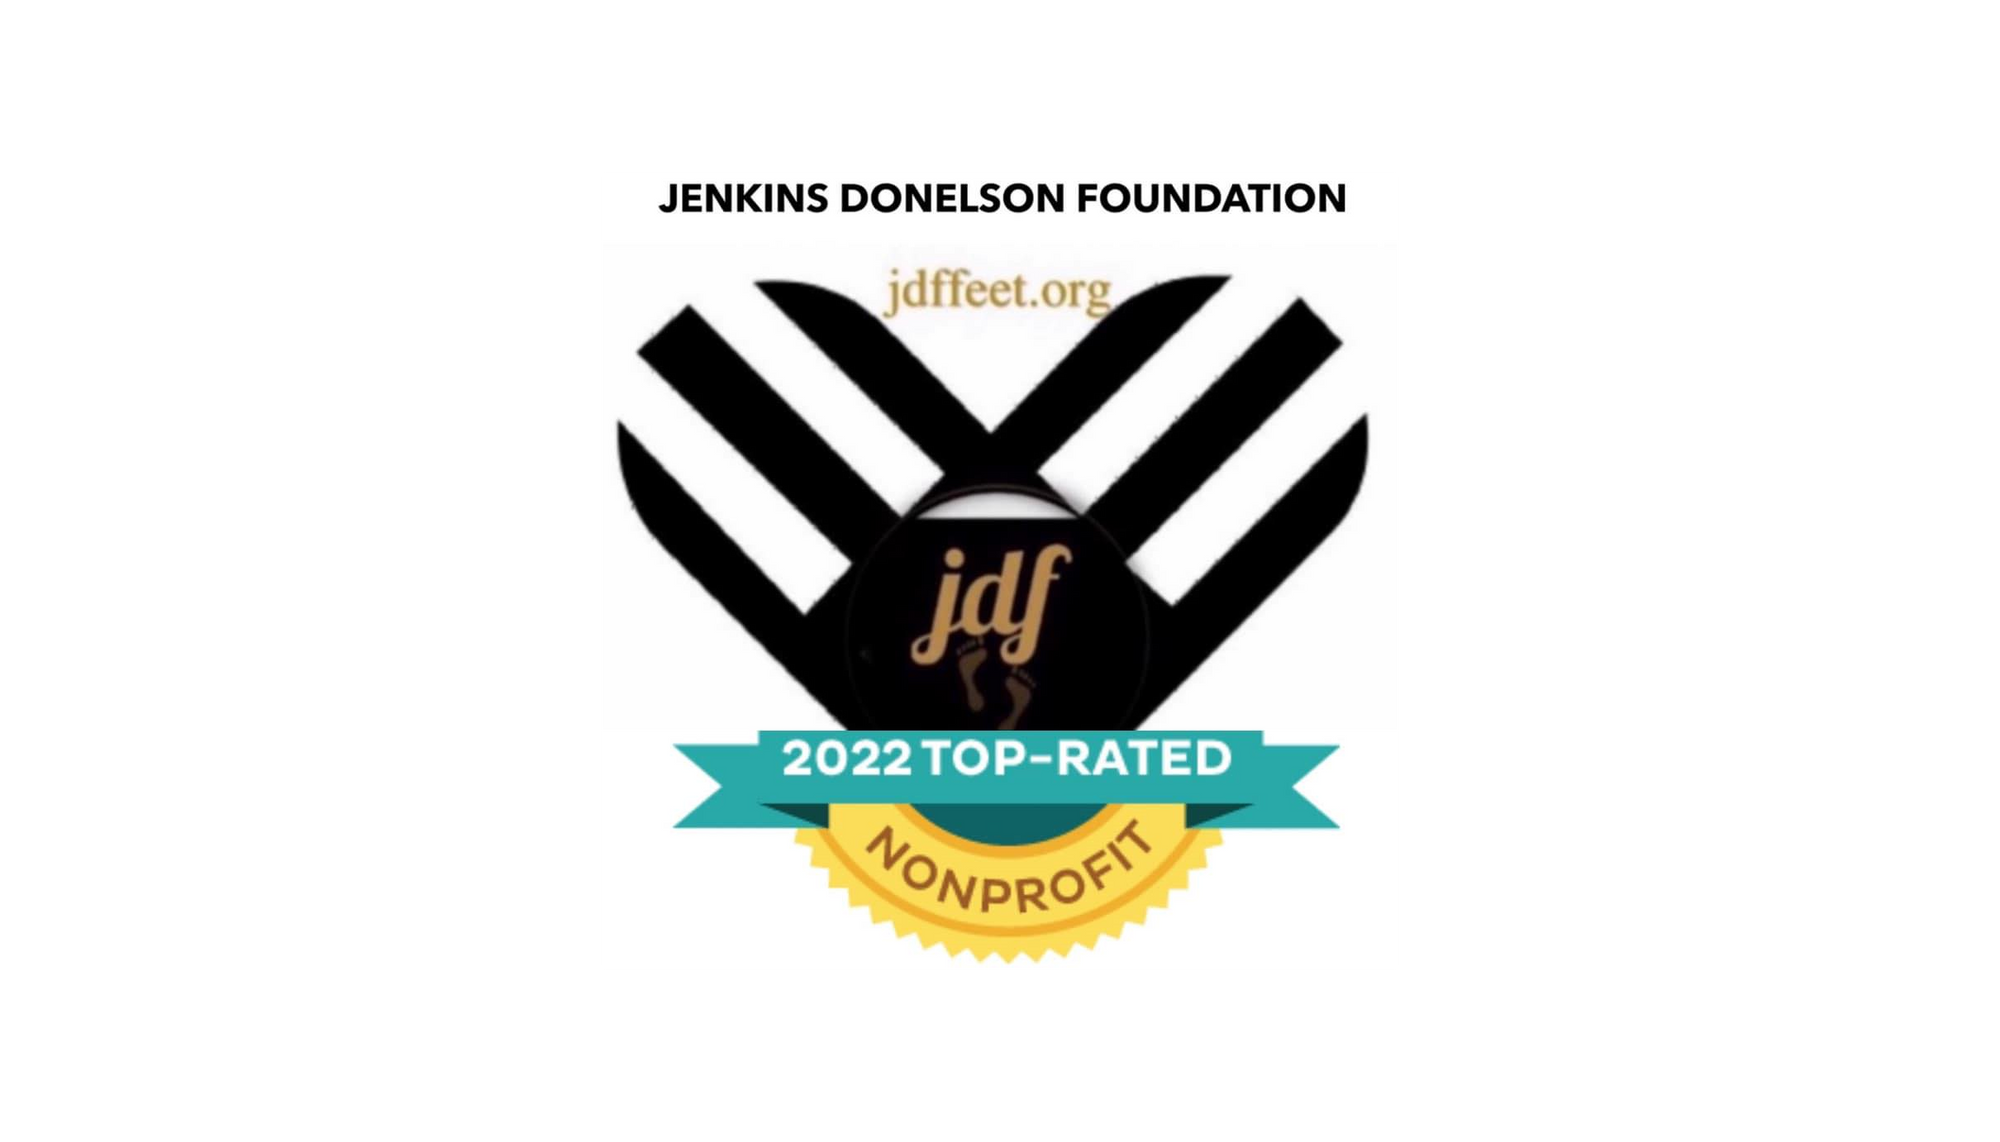 Promoting Foot Health - Jenkins Donelson Foundation